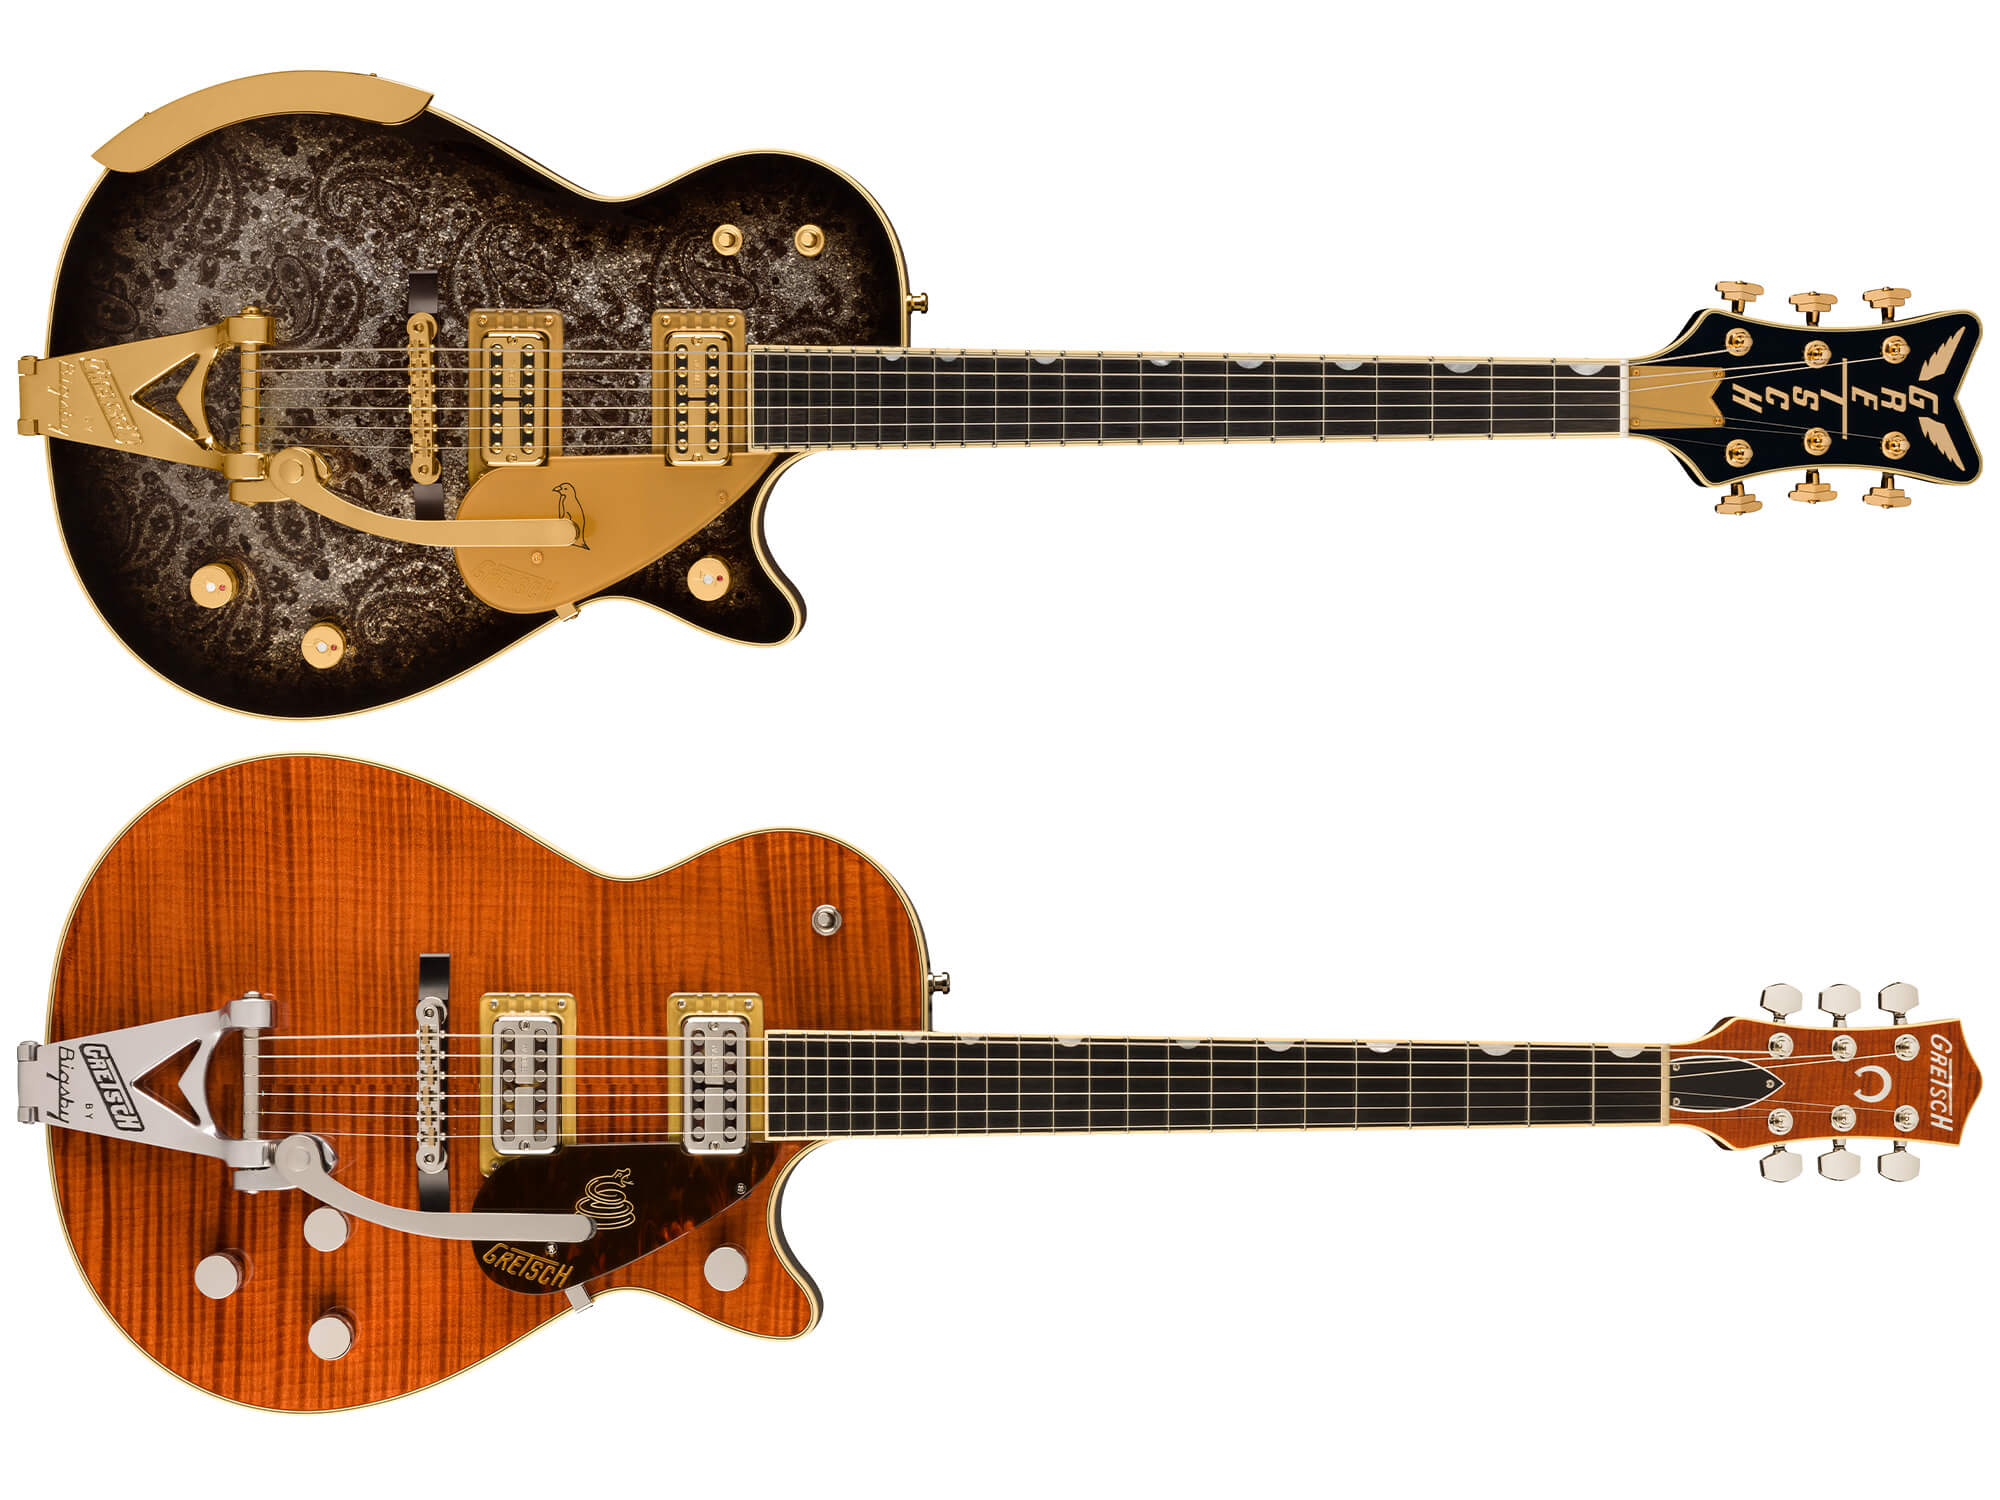 Gretsch Professional Collection Paisley Penguin (top) and Bourbon Sidewinder (bottom)